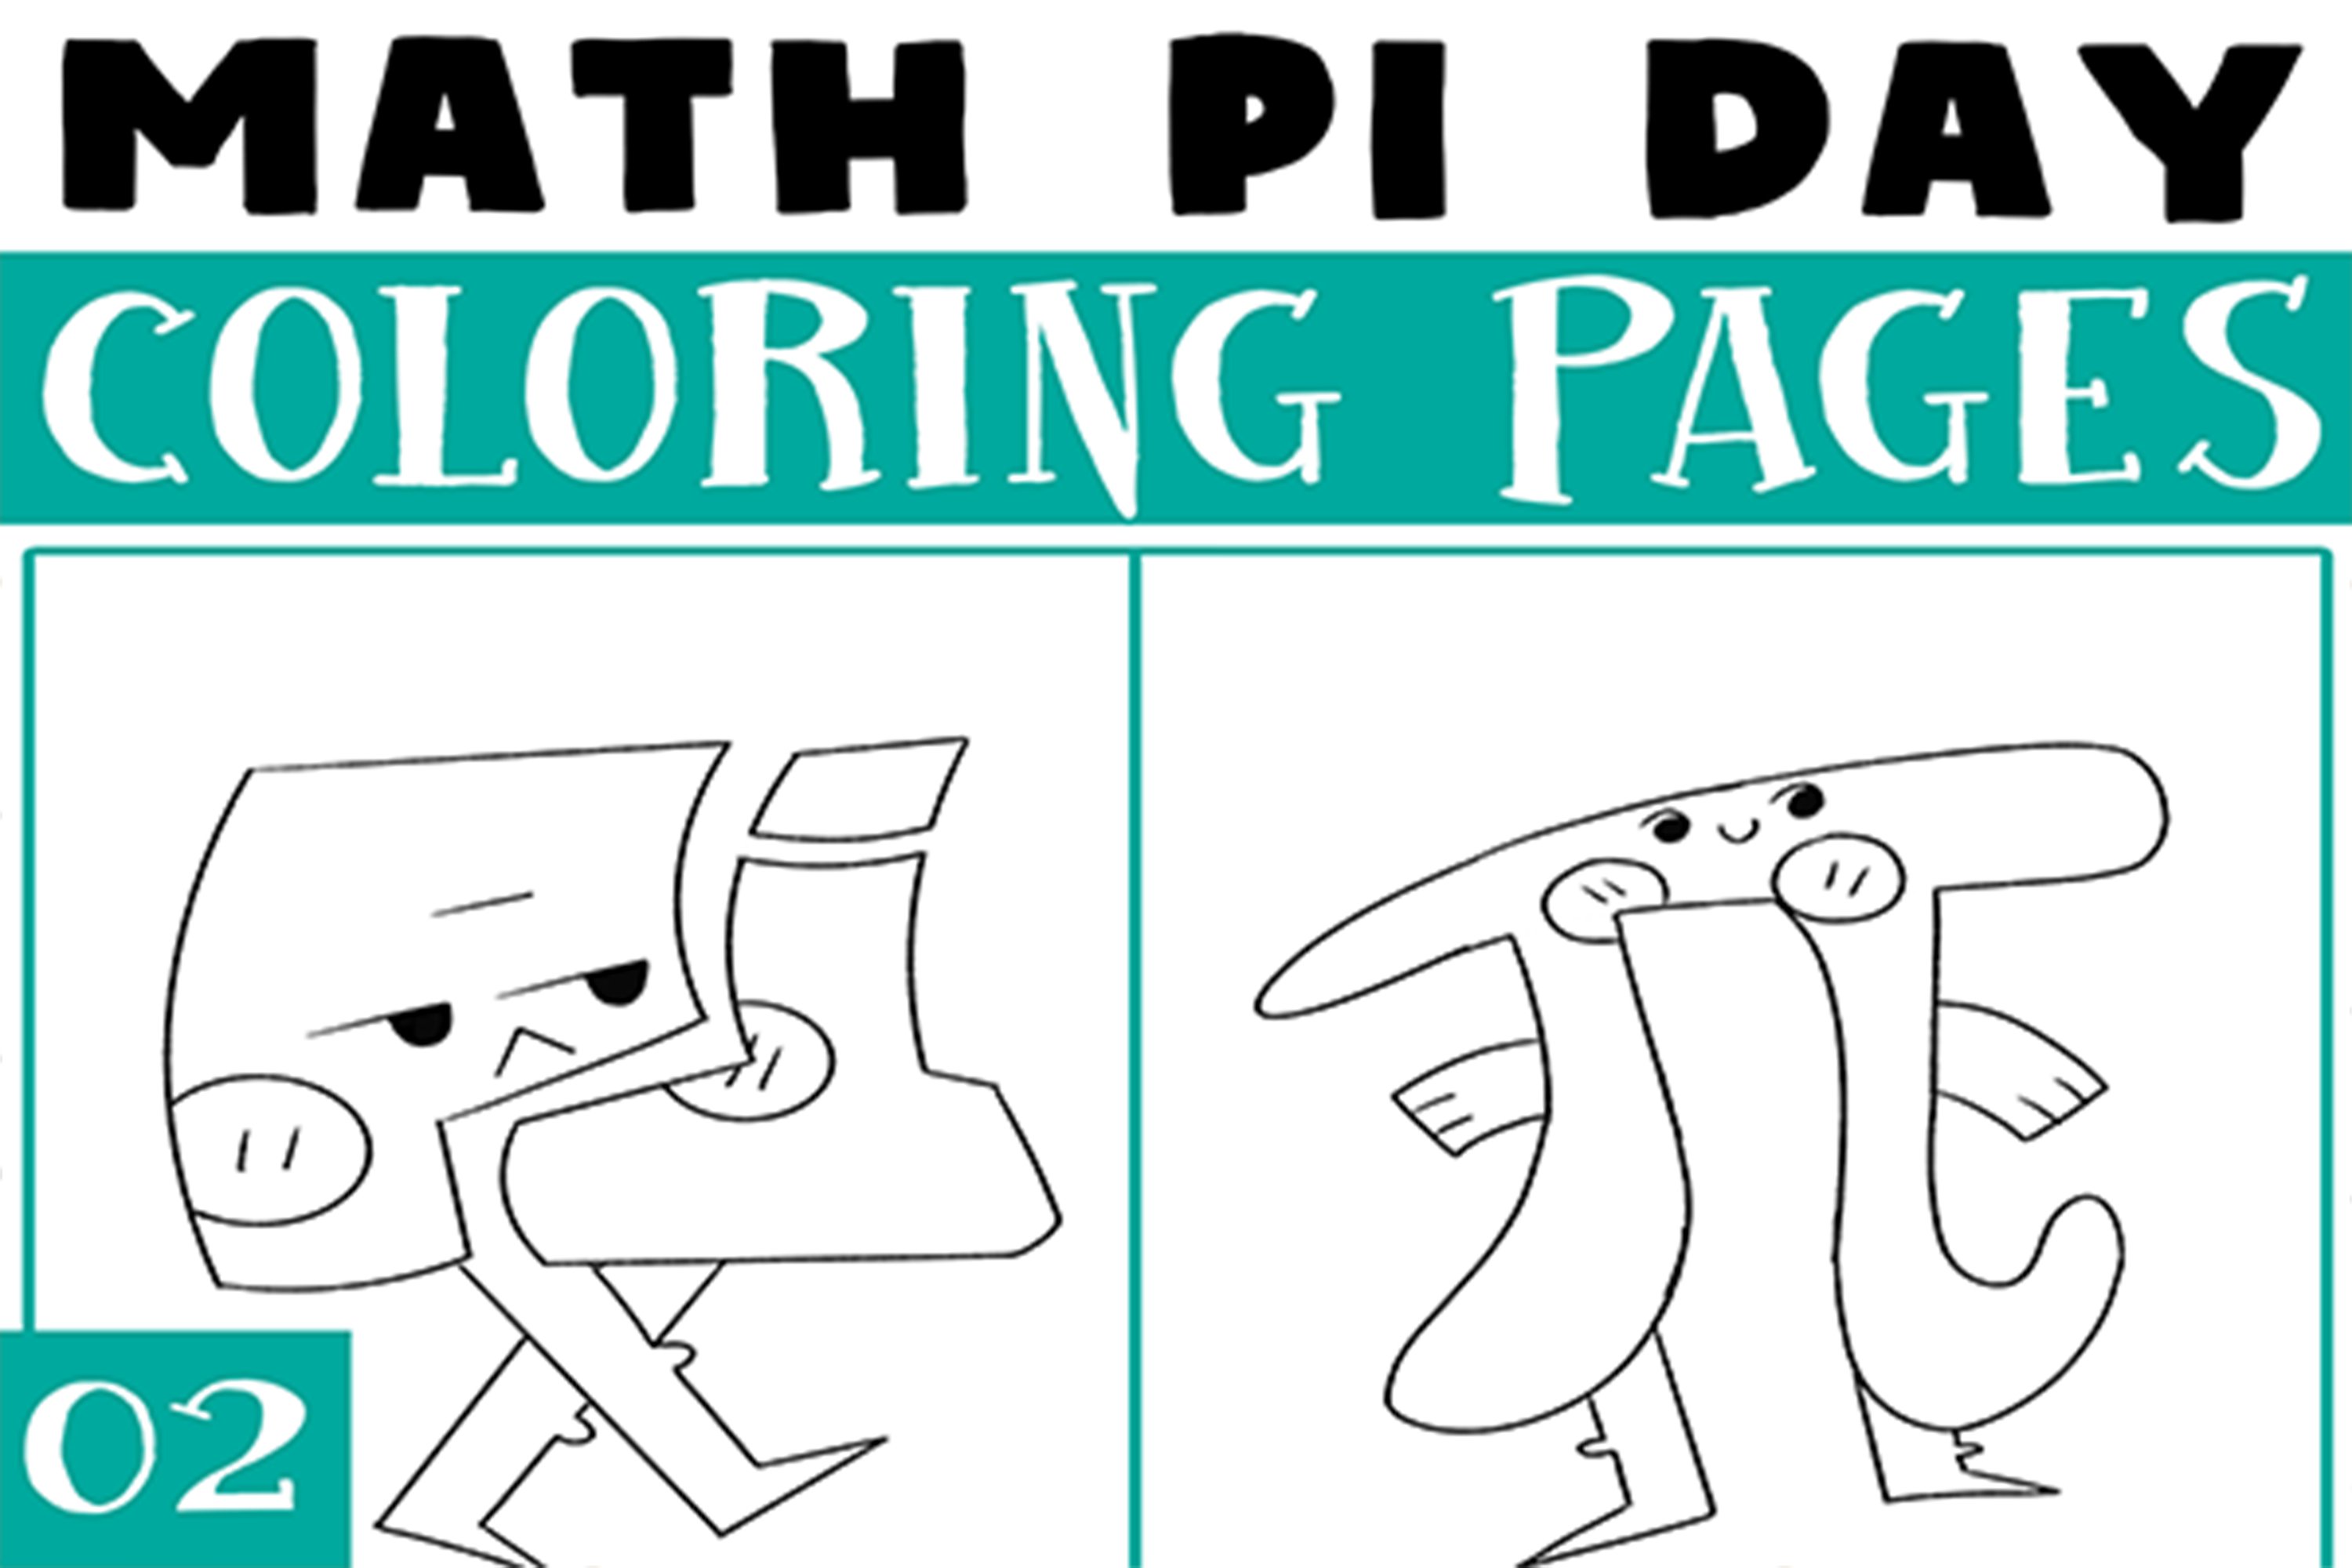 Pi day coloring pages worksheet activities for kids png